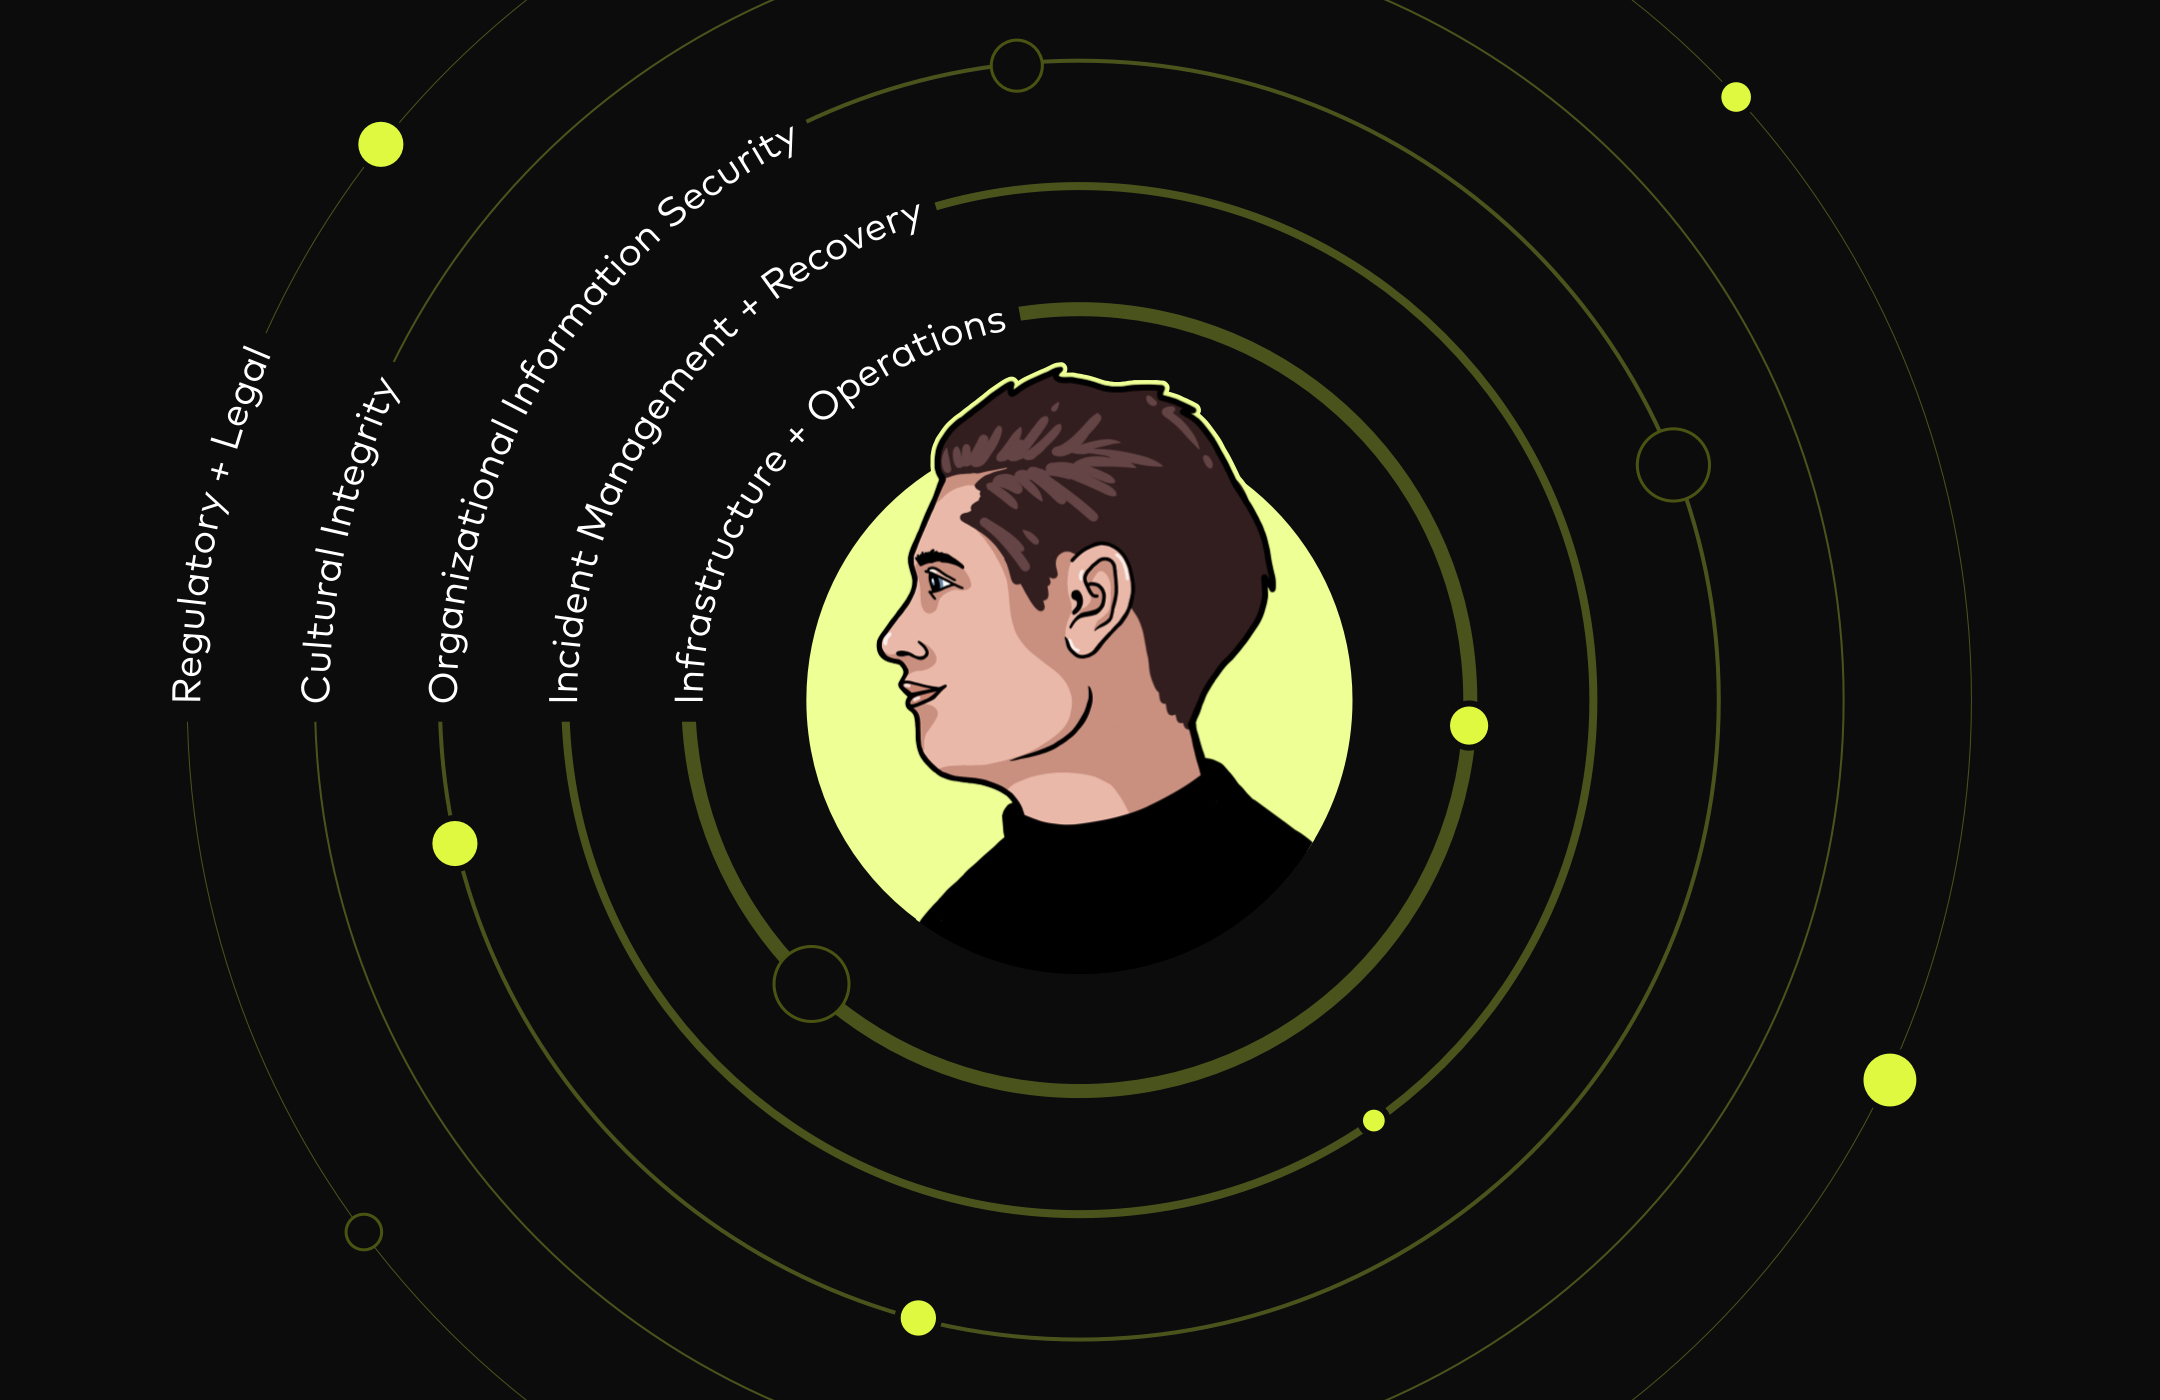 Image of concentric circles around an illustration of a person with text going around each circle.